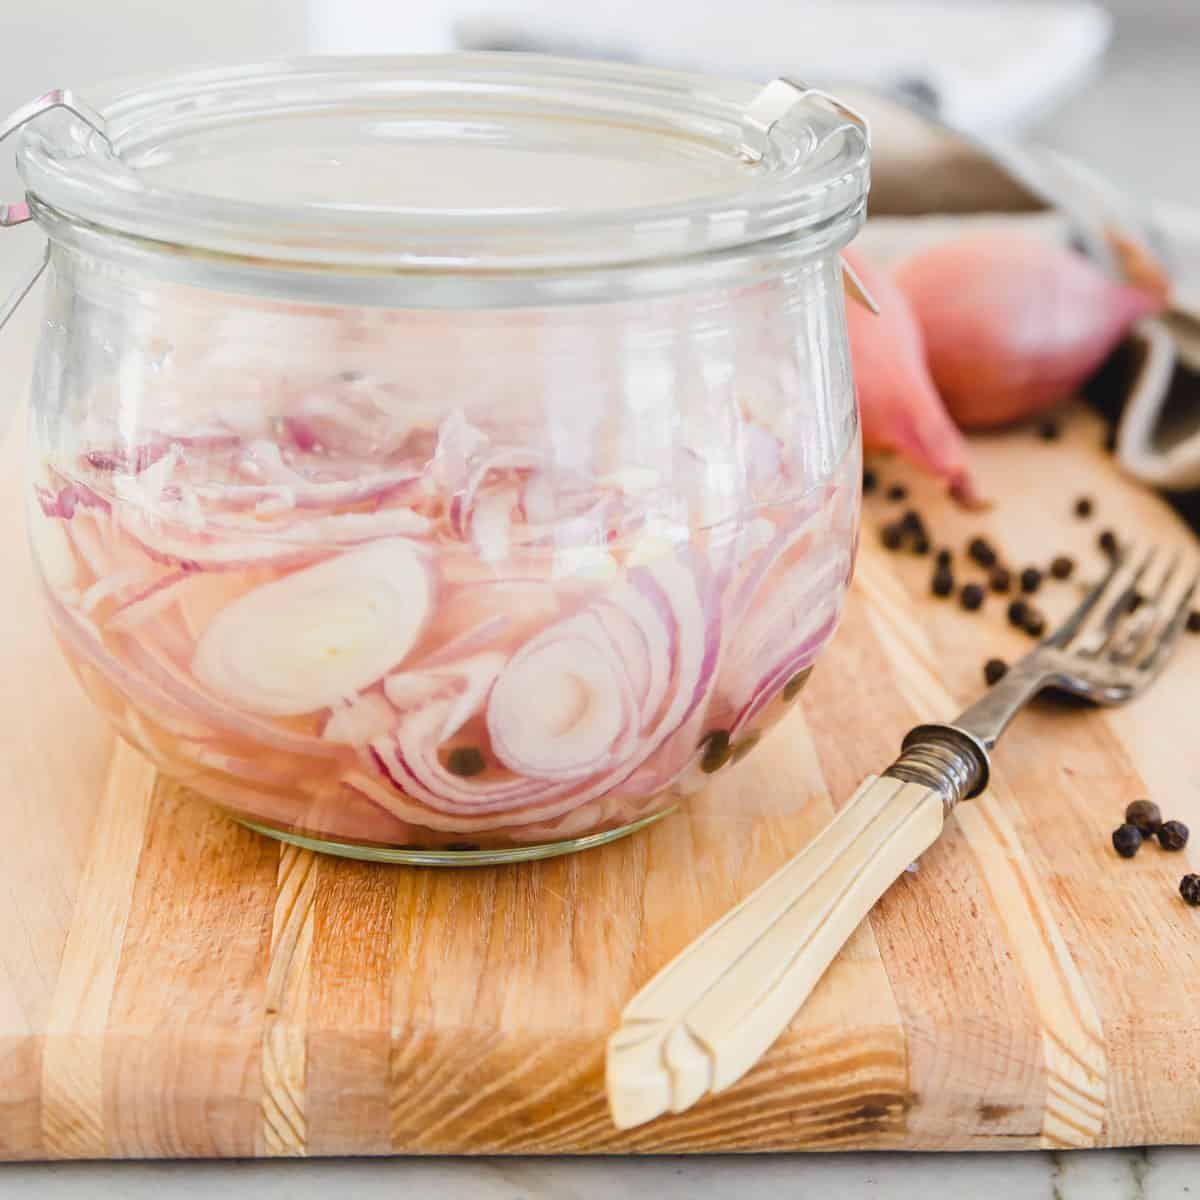 Pickled shallots in a glass Weck jar with a fork on the side.